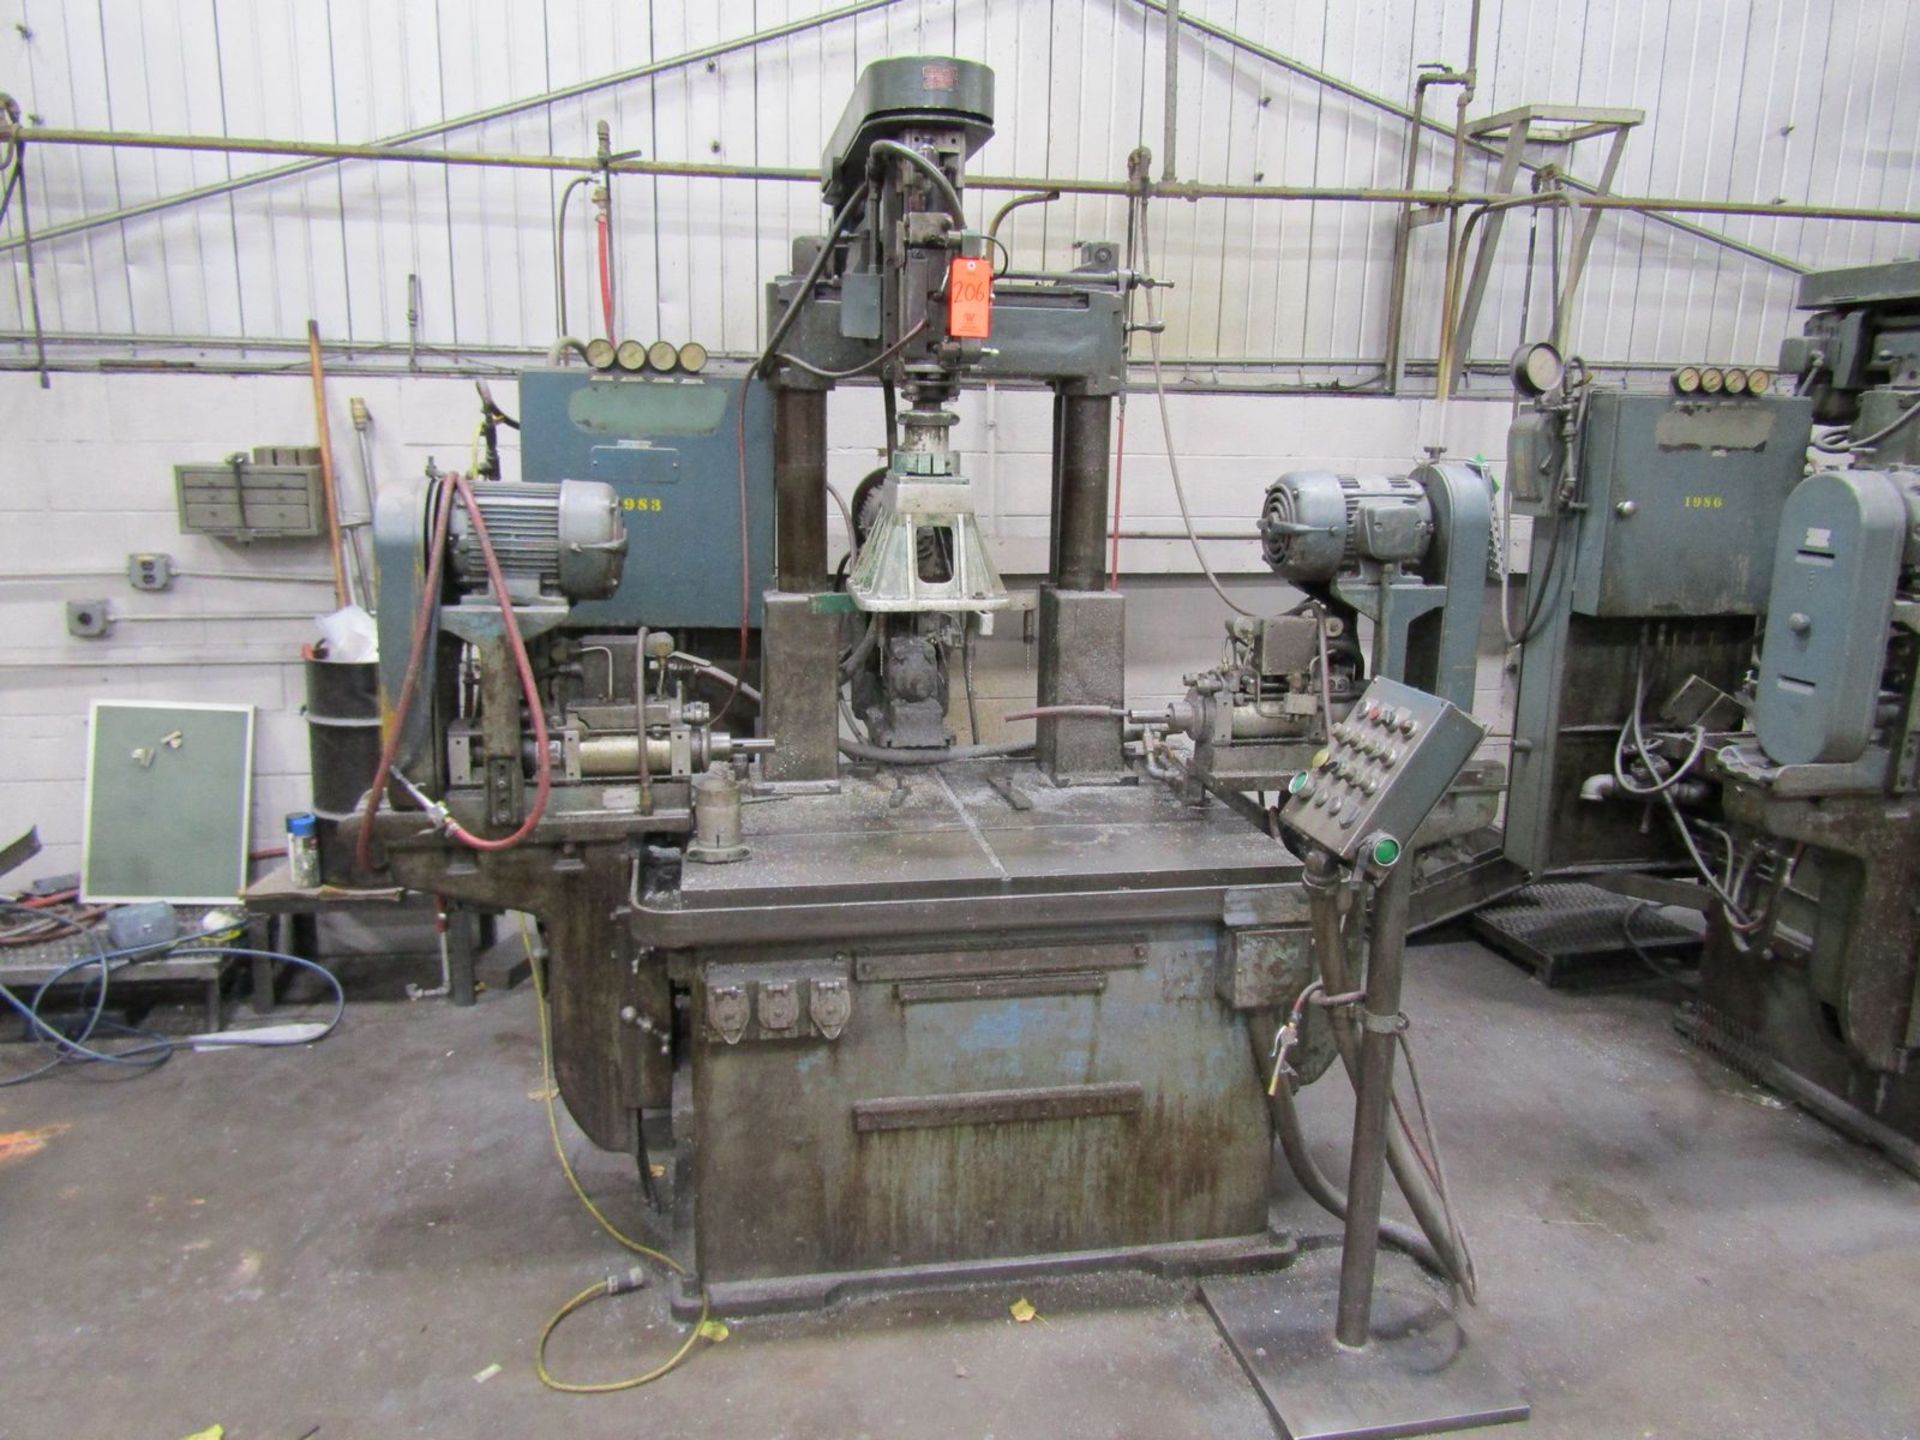 Wisconsin Drill Head "Wis-Matic" 4-Head Rotary Indexing Secondary Operation Drilling & Tapping